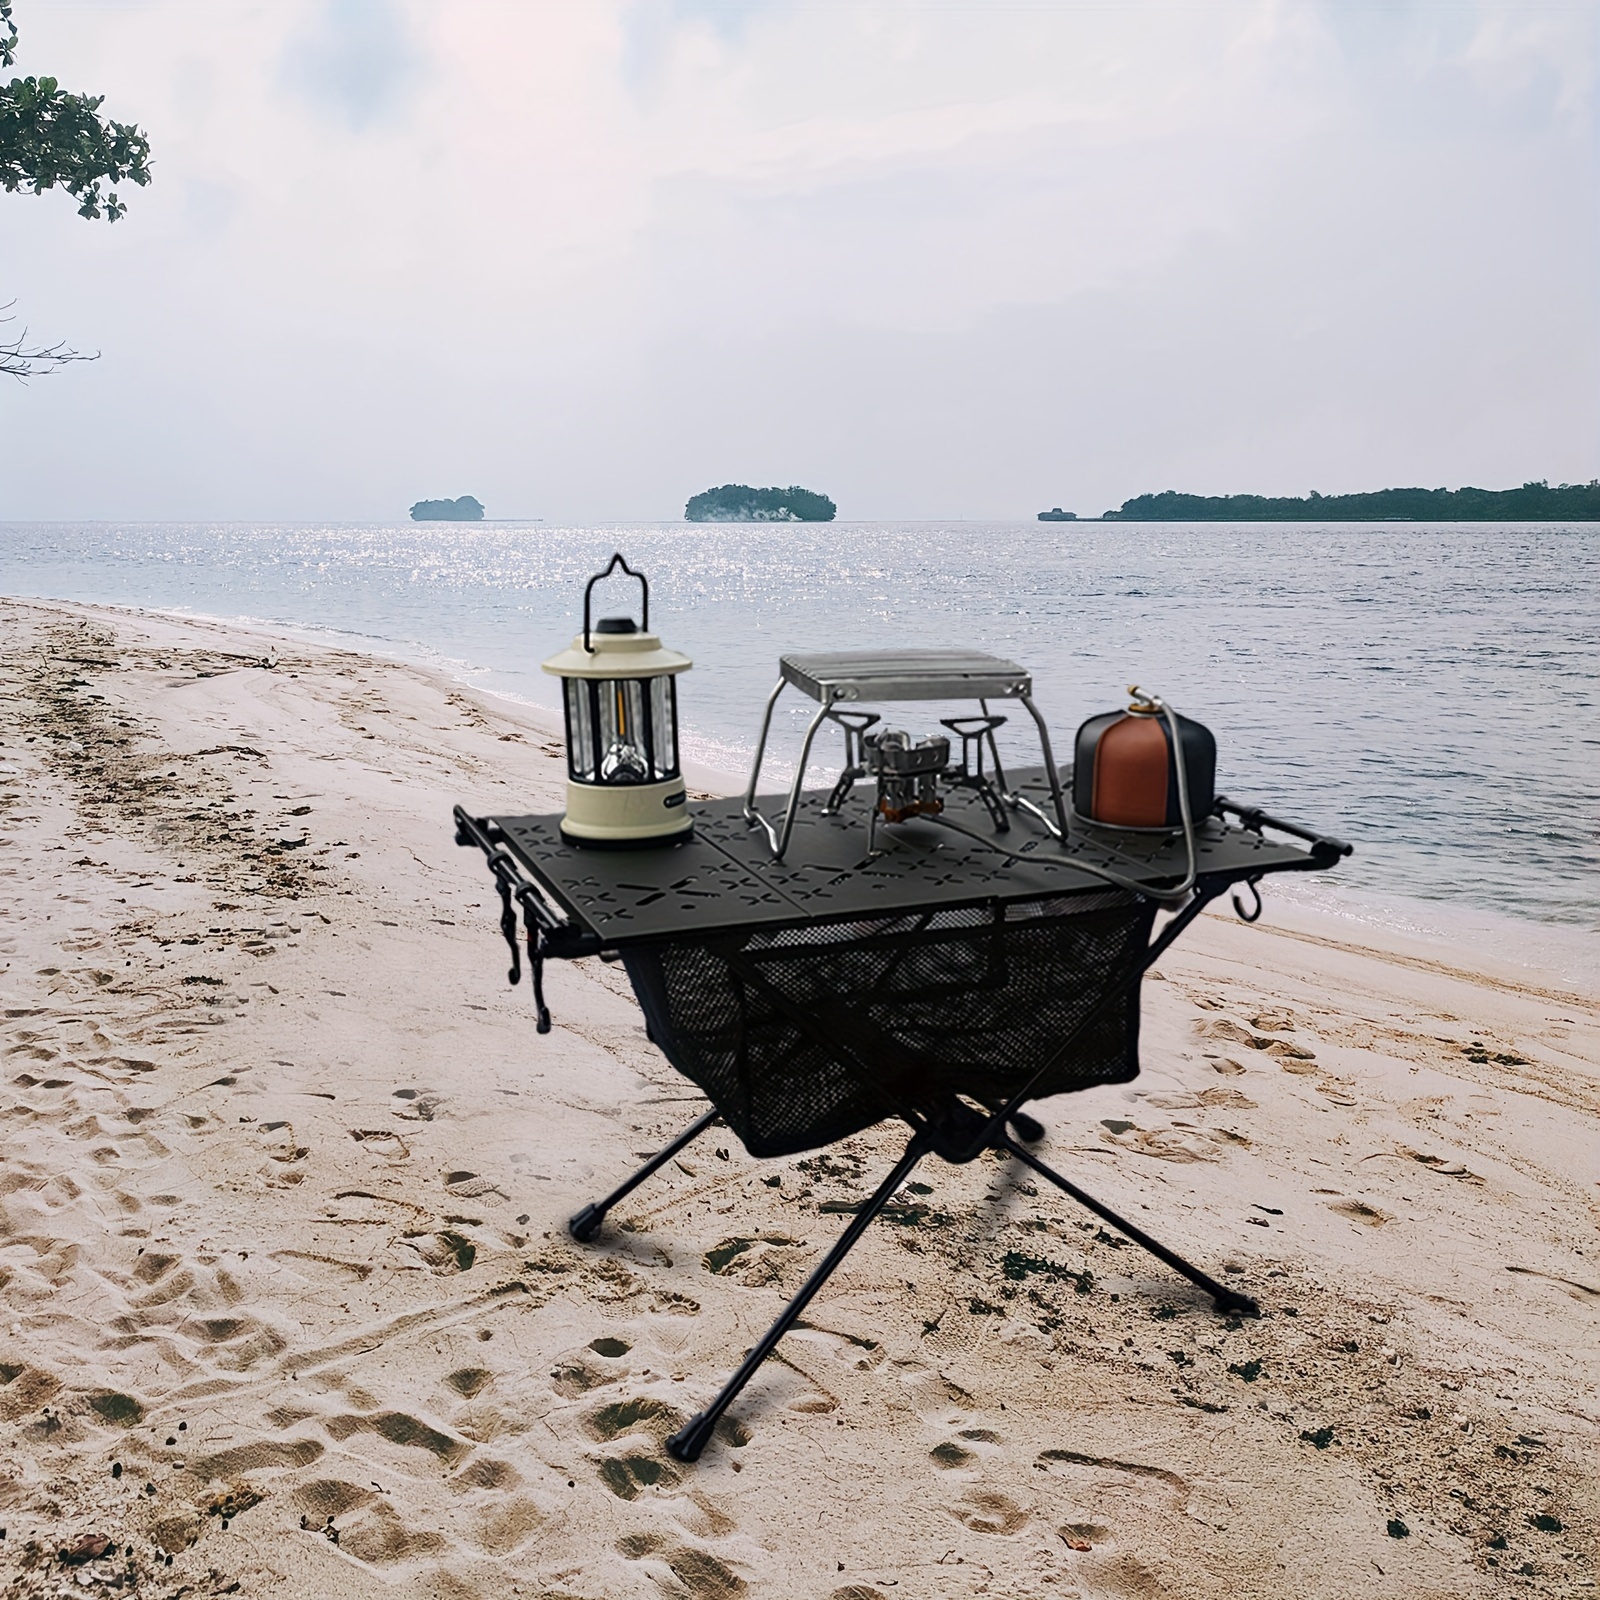 

West Tune Portable Camping Table, Beach Table With Storage And Carrying Bag, Folding Igt Table, Ultralight Aluminum Compact Camp Table For Camping Beach Picnic